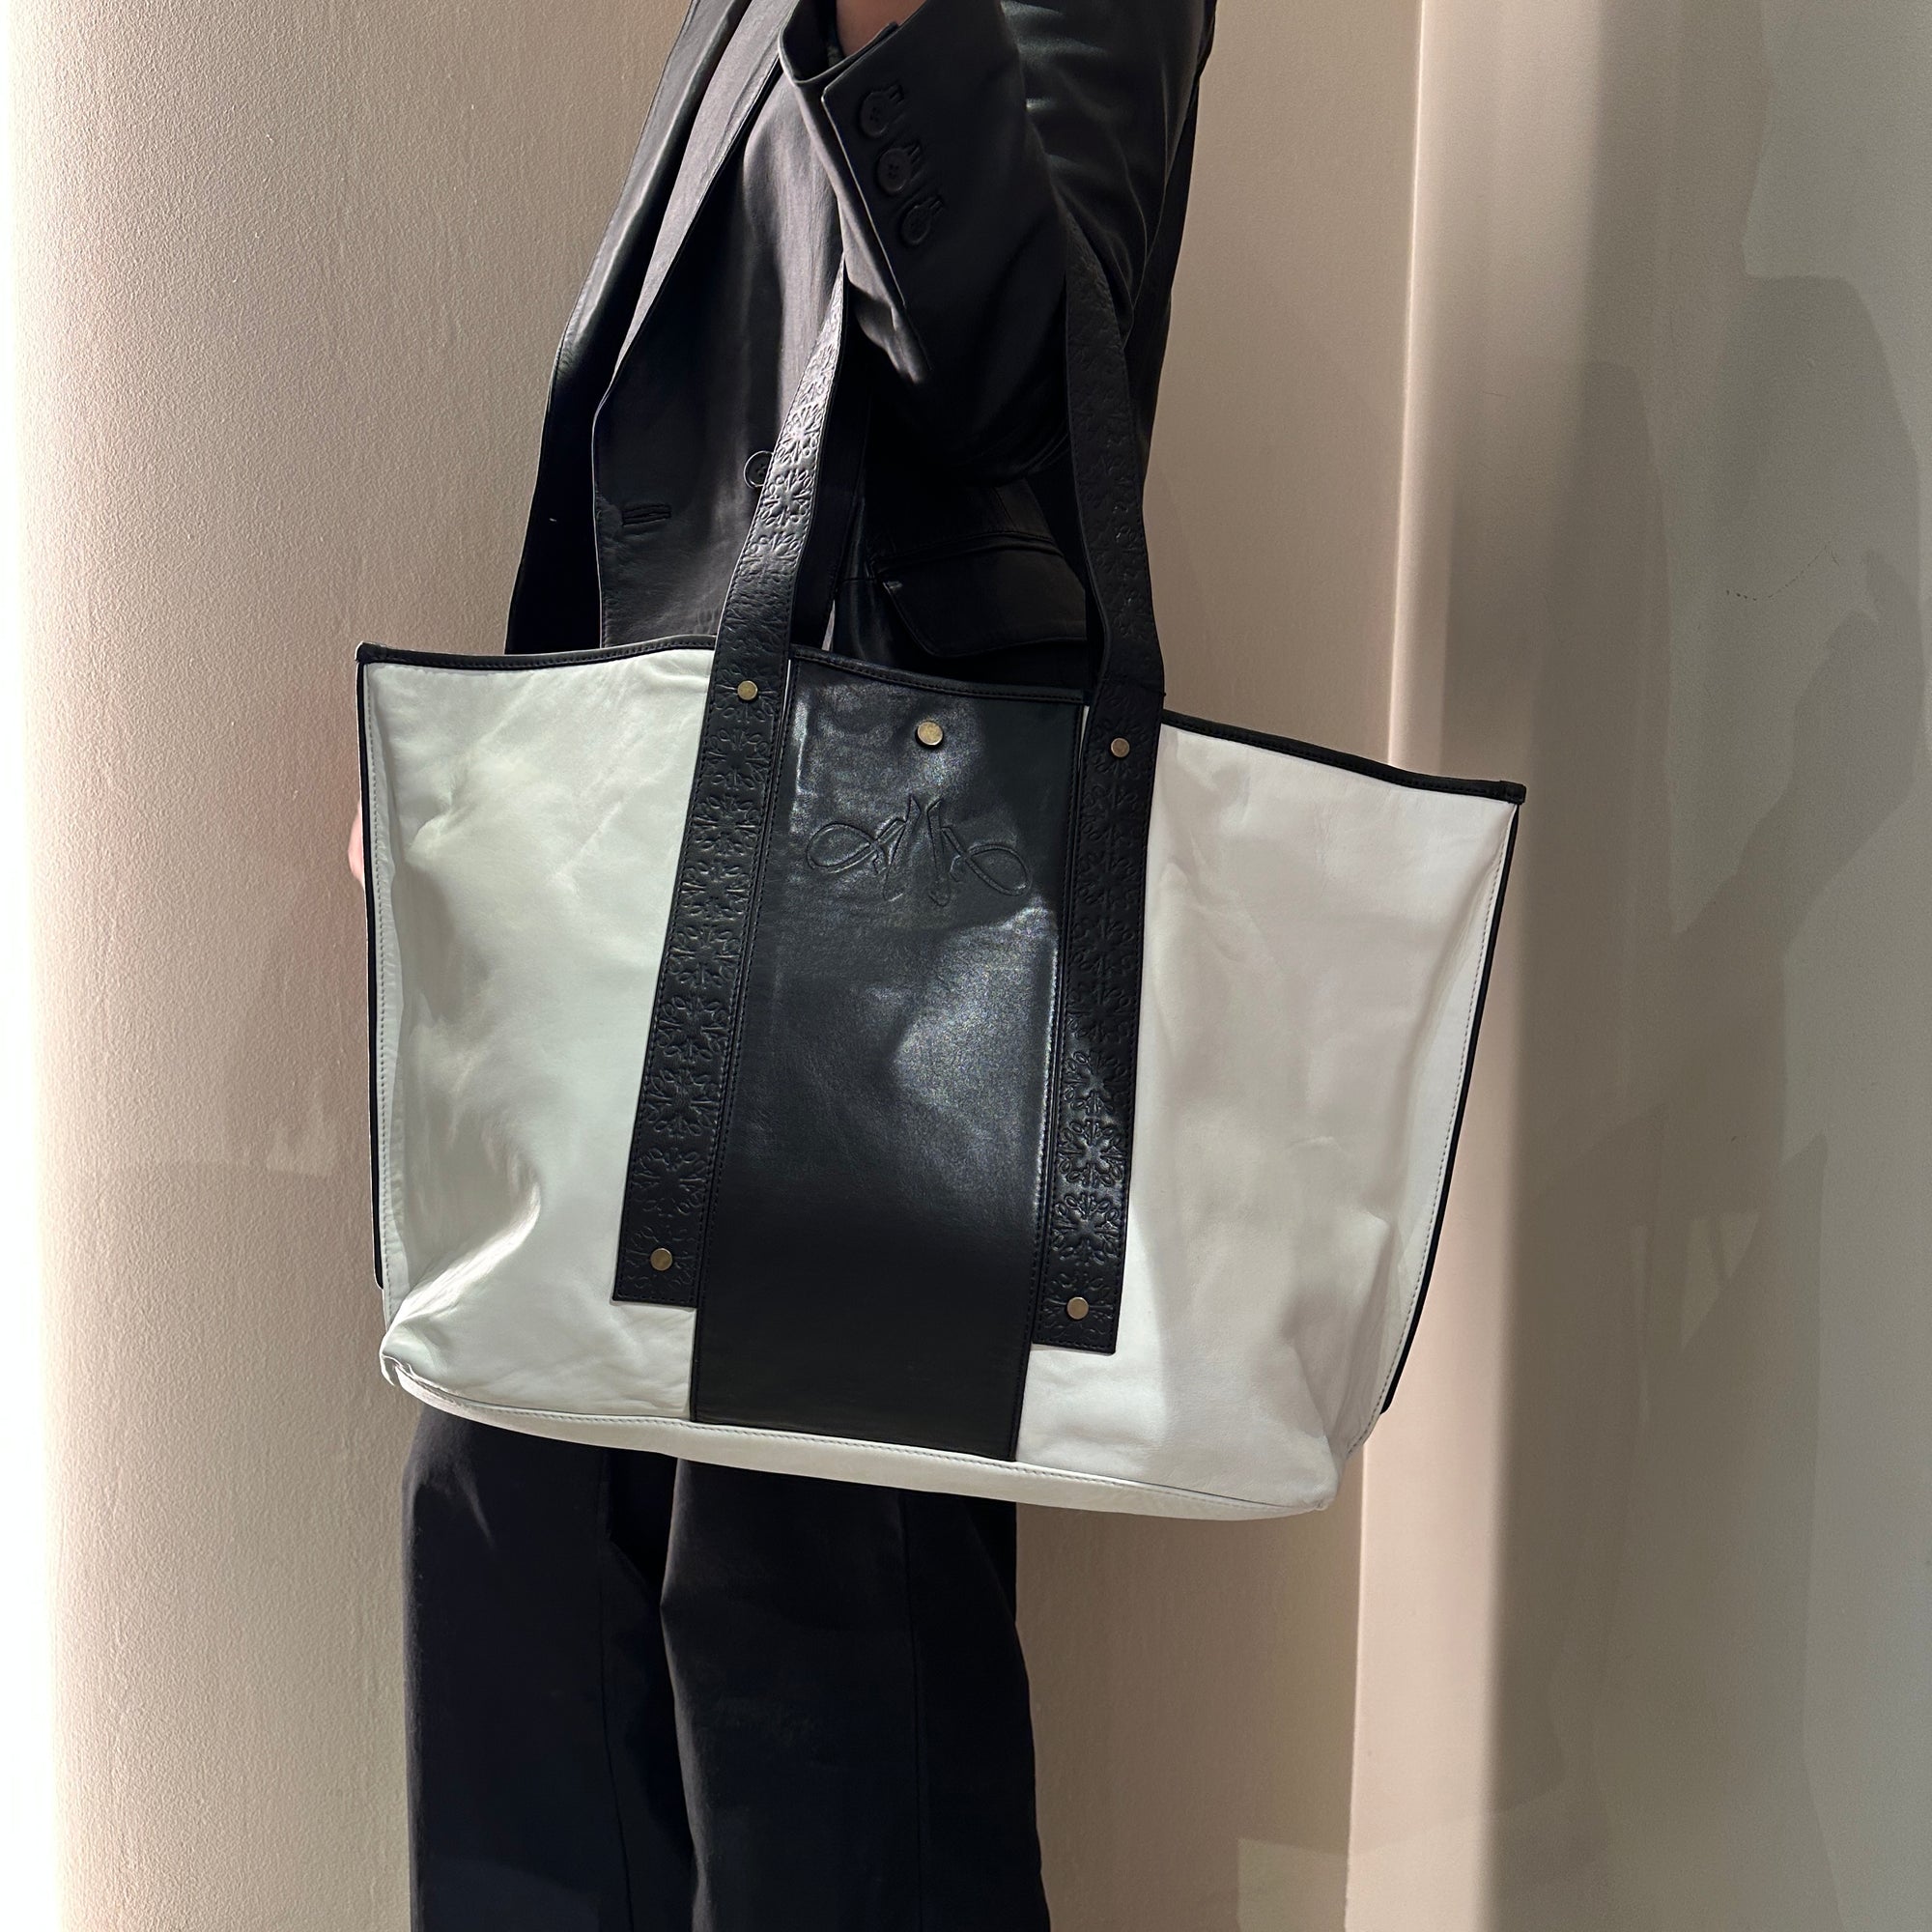 AndreA - "All In" Tote bag